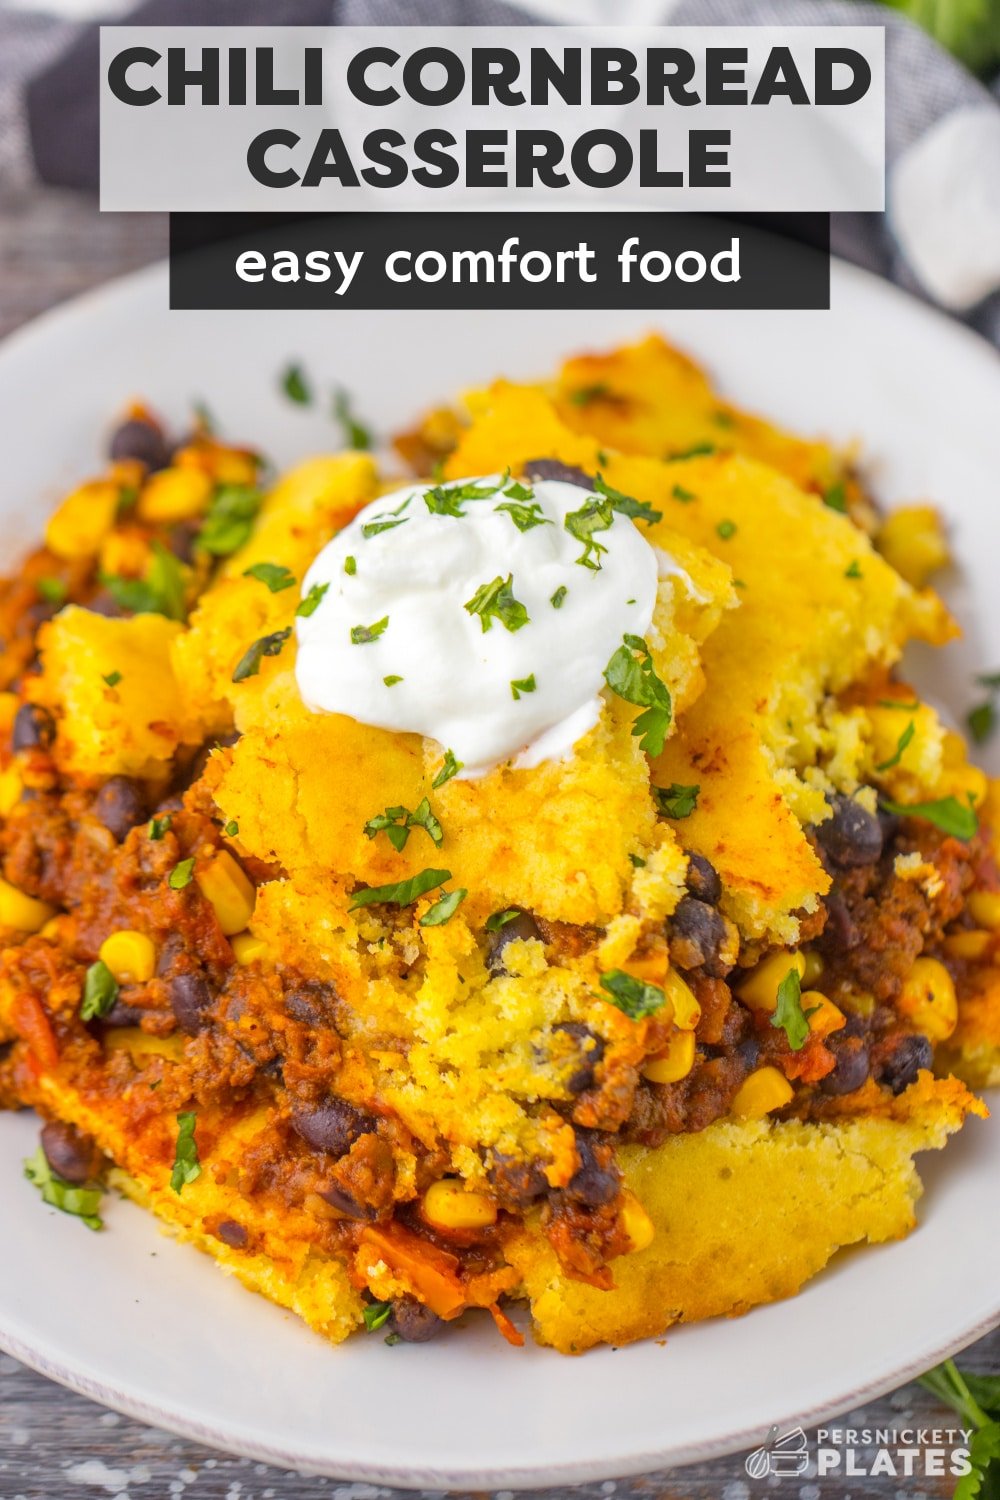 This chili cornbread casserole with Jiffy mix tastes like your mom’s chili but is topped with a layer of sweet and crispy cornbread. It’s the definition of Southern comfort food but super easy! | www.persnicketyplates.com